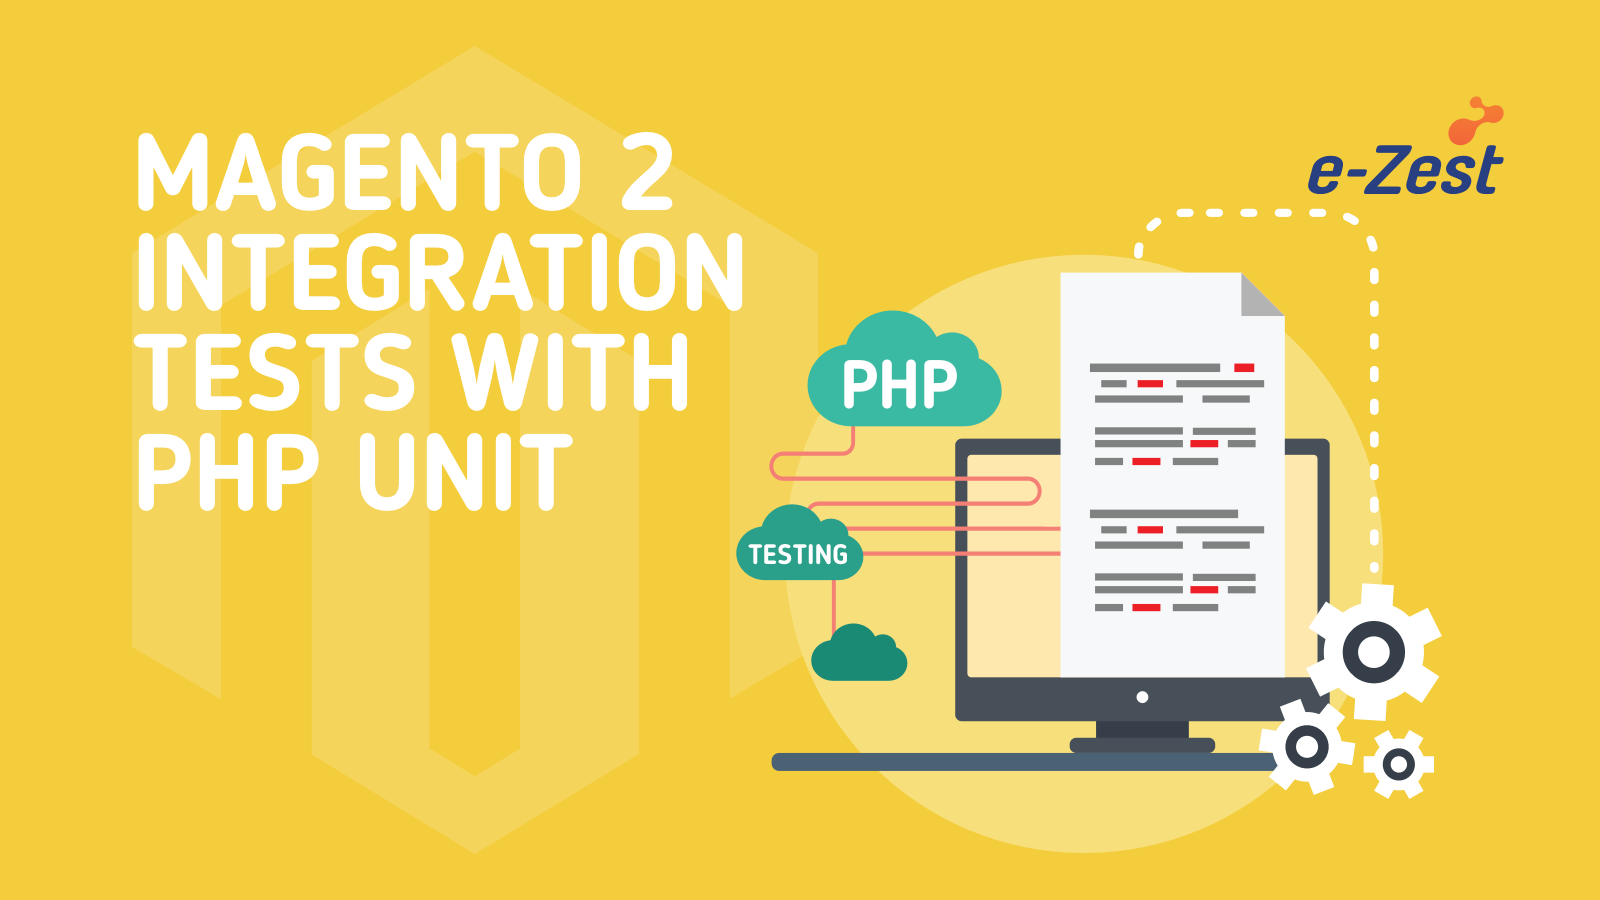 Magento 2- Integration tests with PHP unit